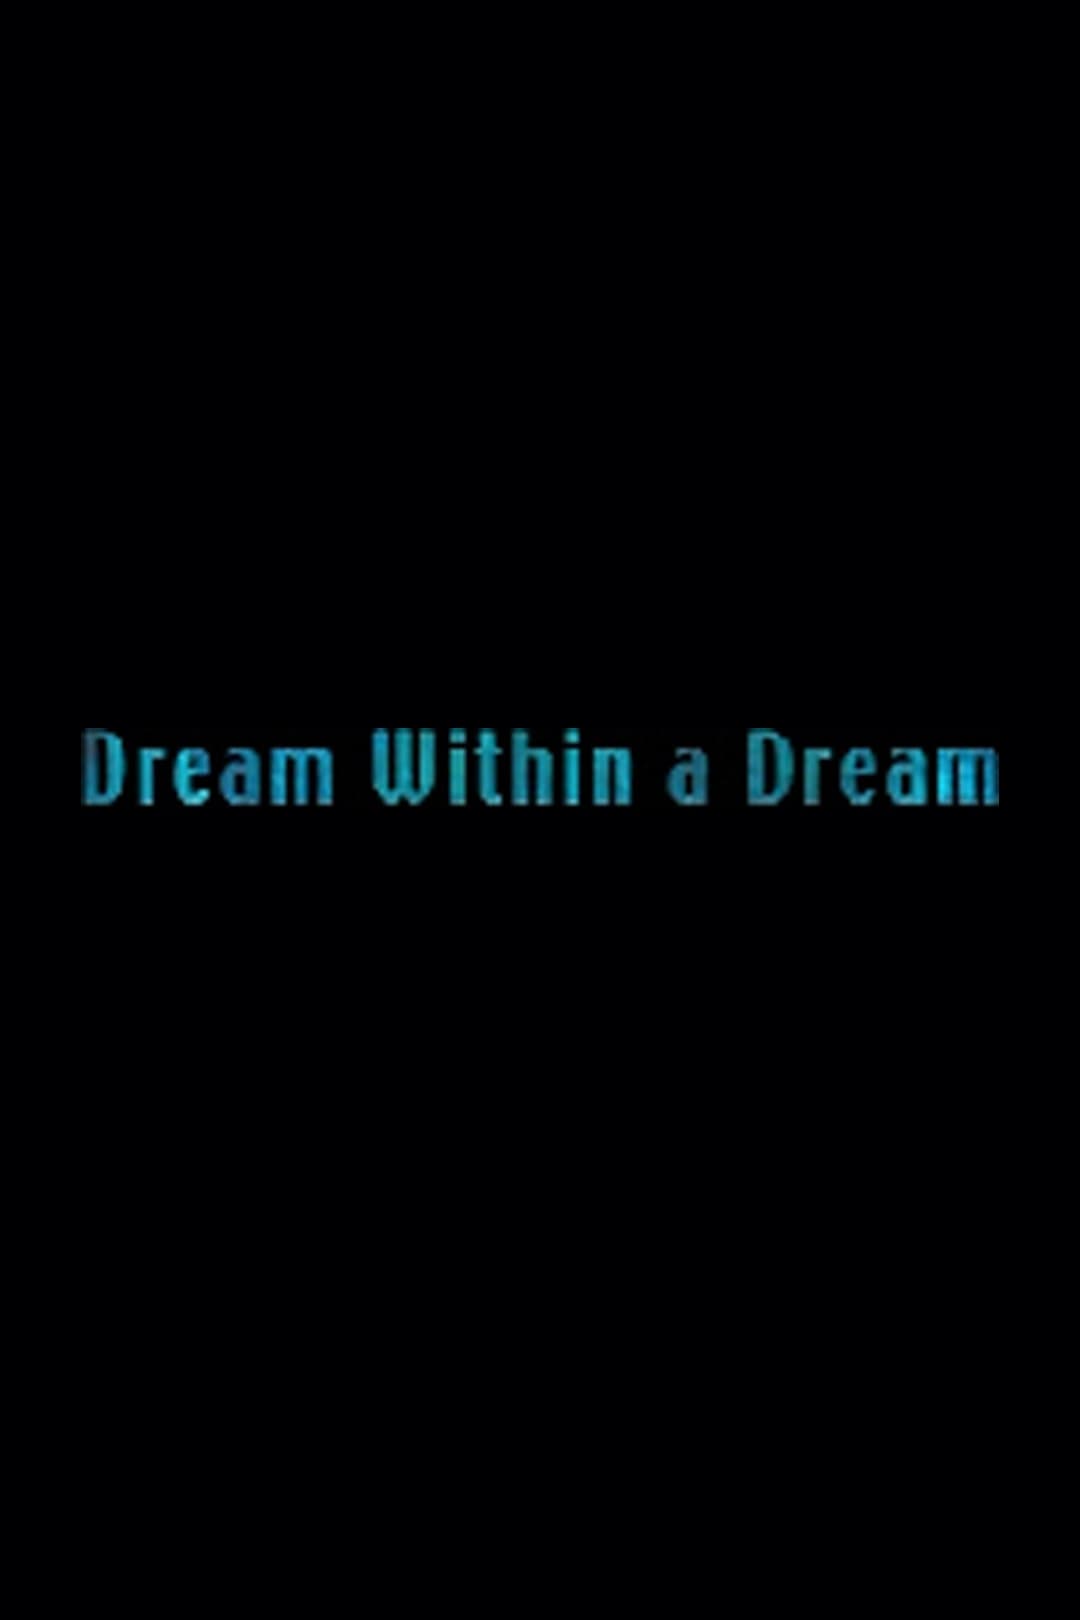 Femme Fatale: Dream Within a Dream (2003)